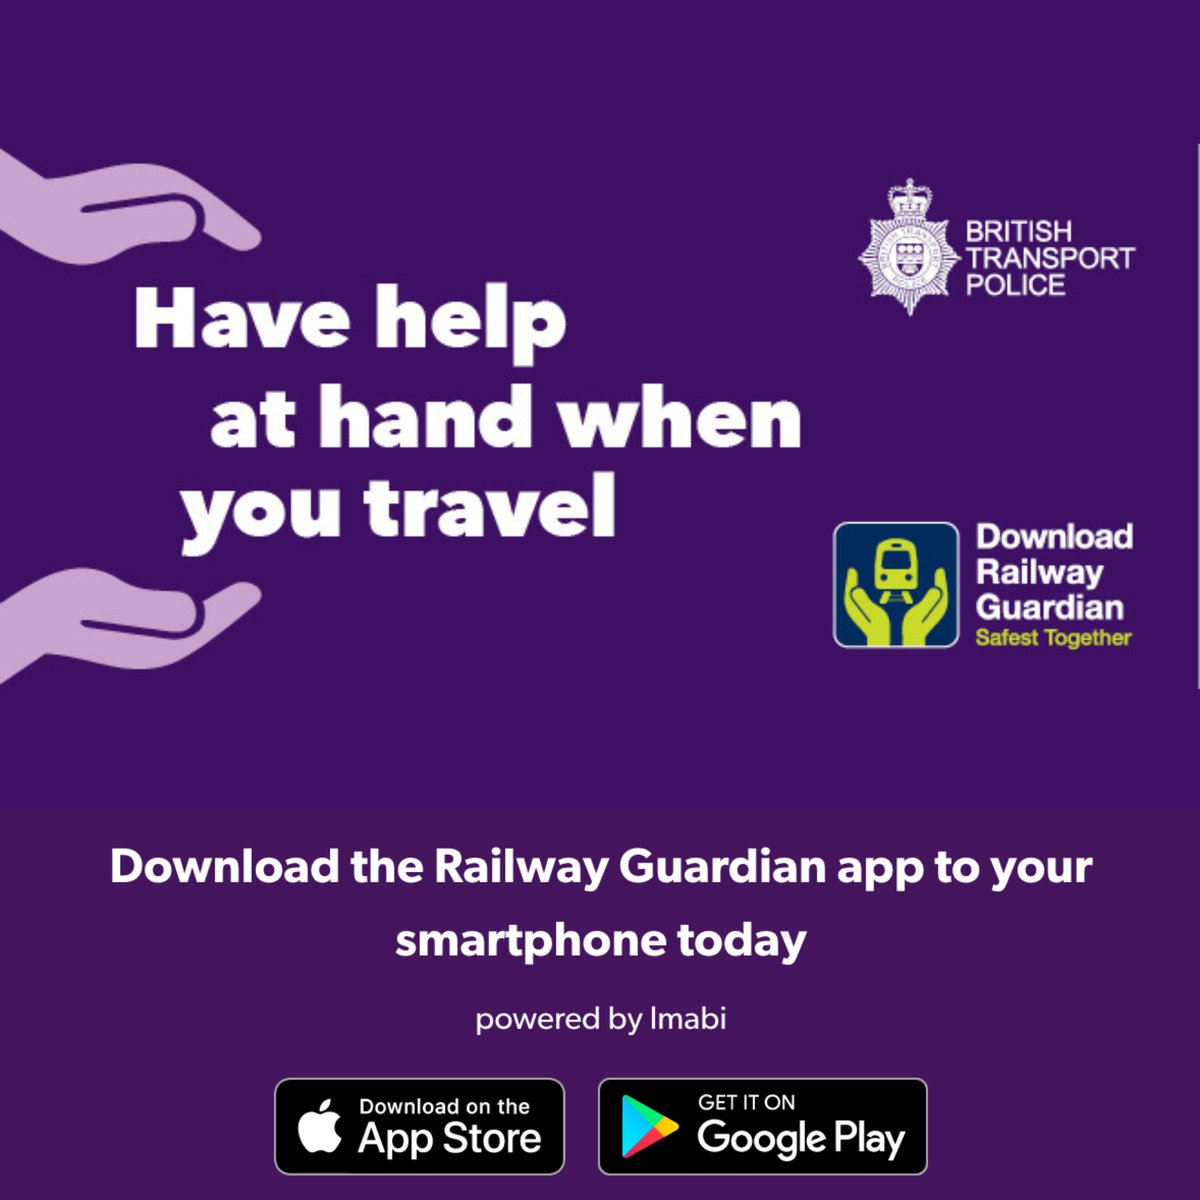 🚃 The #RailwayGuardianApp is an all-in-one app from the British Transport Police specifically designed to improve safety on the UK rail network.

This can be extremely helpful in many circumstances & we encourage you all to download the app today.

#britishtransportpolice #hdah